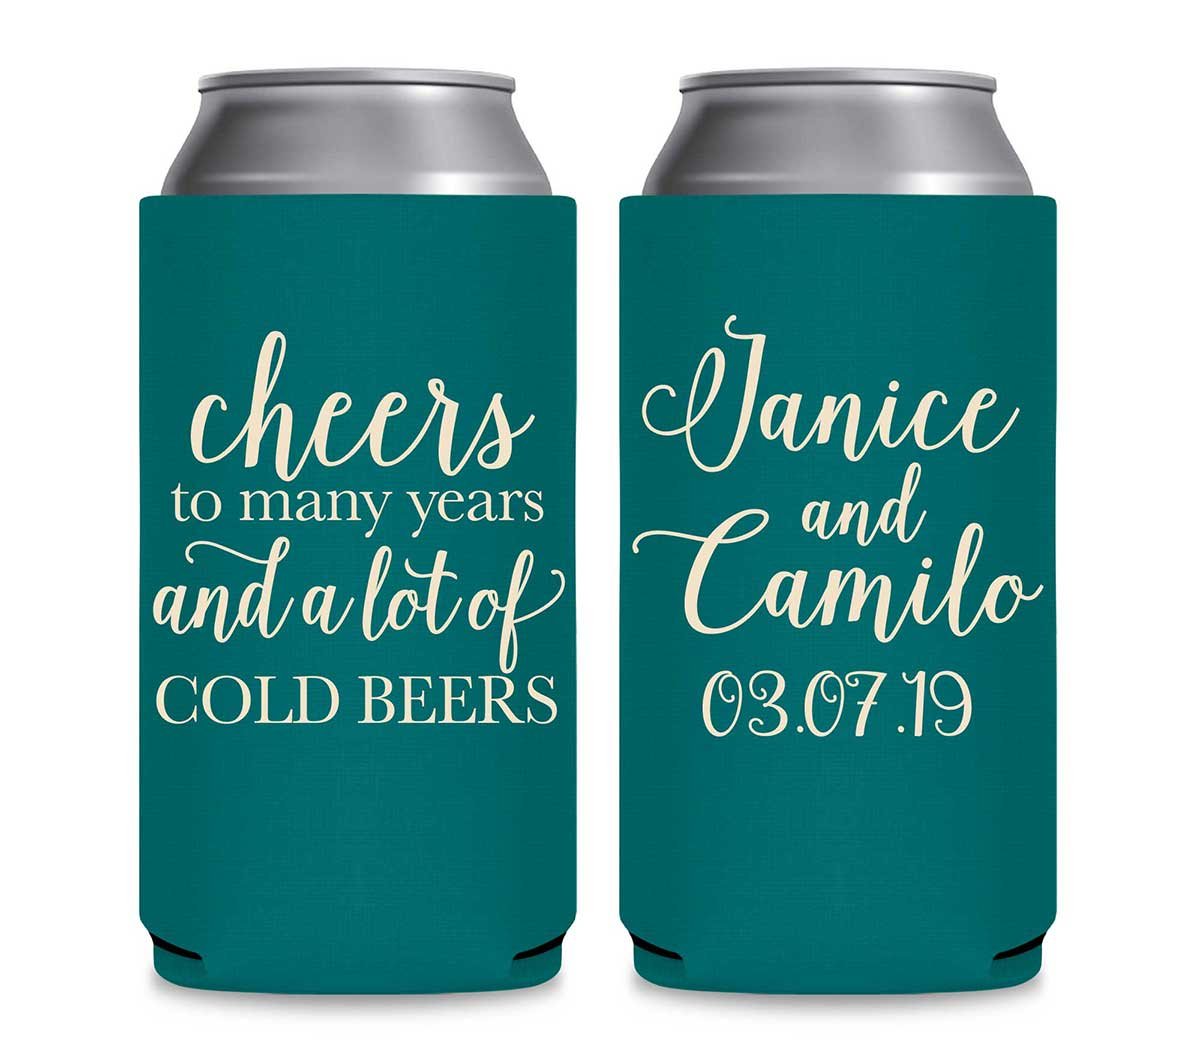 Cheers To Many Years 1A And Lot Of Cold Beers Foldable 12 oz Slim Can Koozies Wedding Gifts for Guests